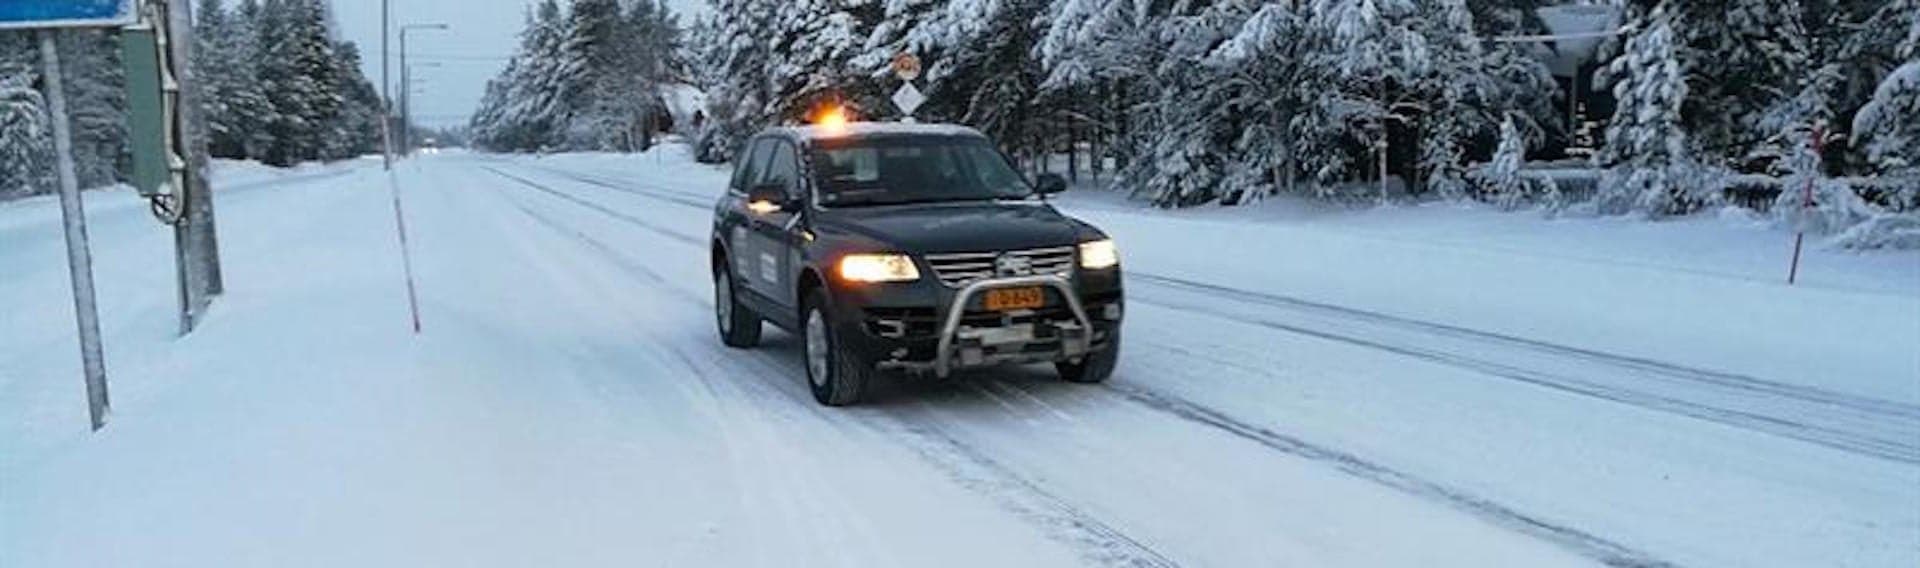 Finnish Self-Driving Car Plows Through Snow Like No Other Autonomous Car to Date